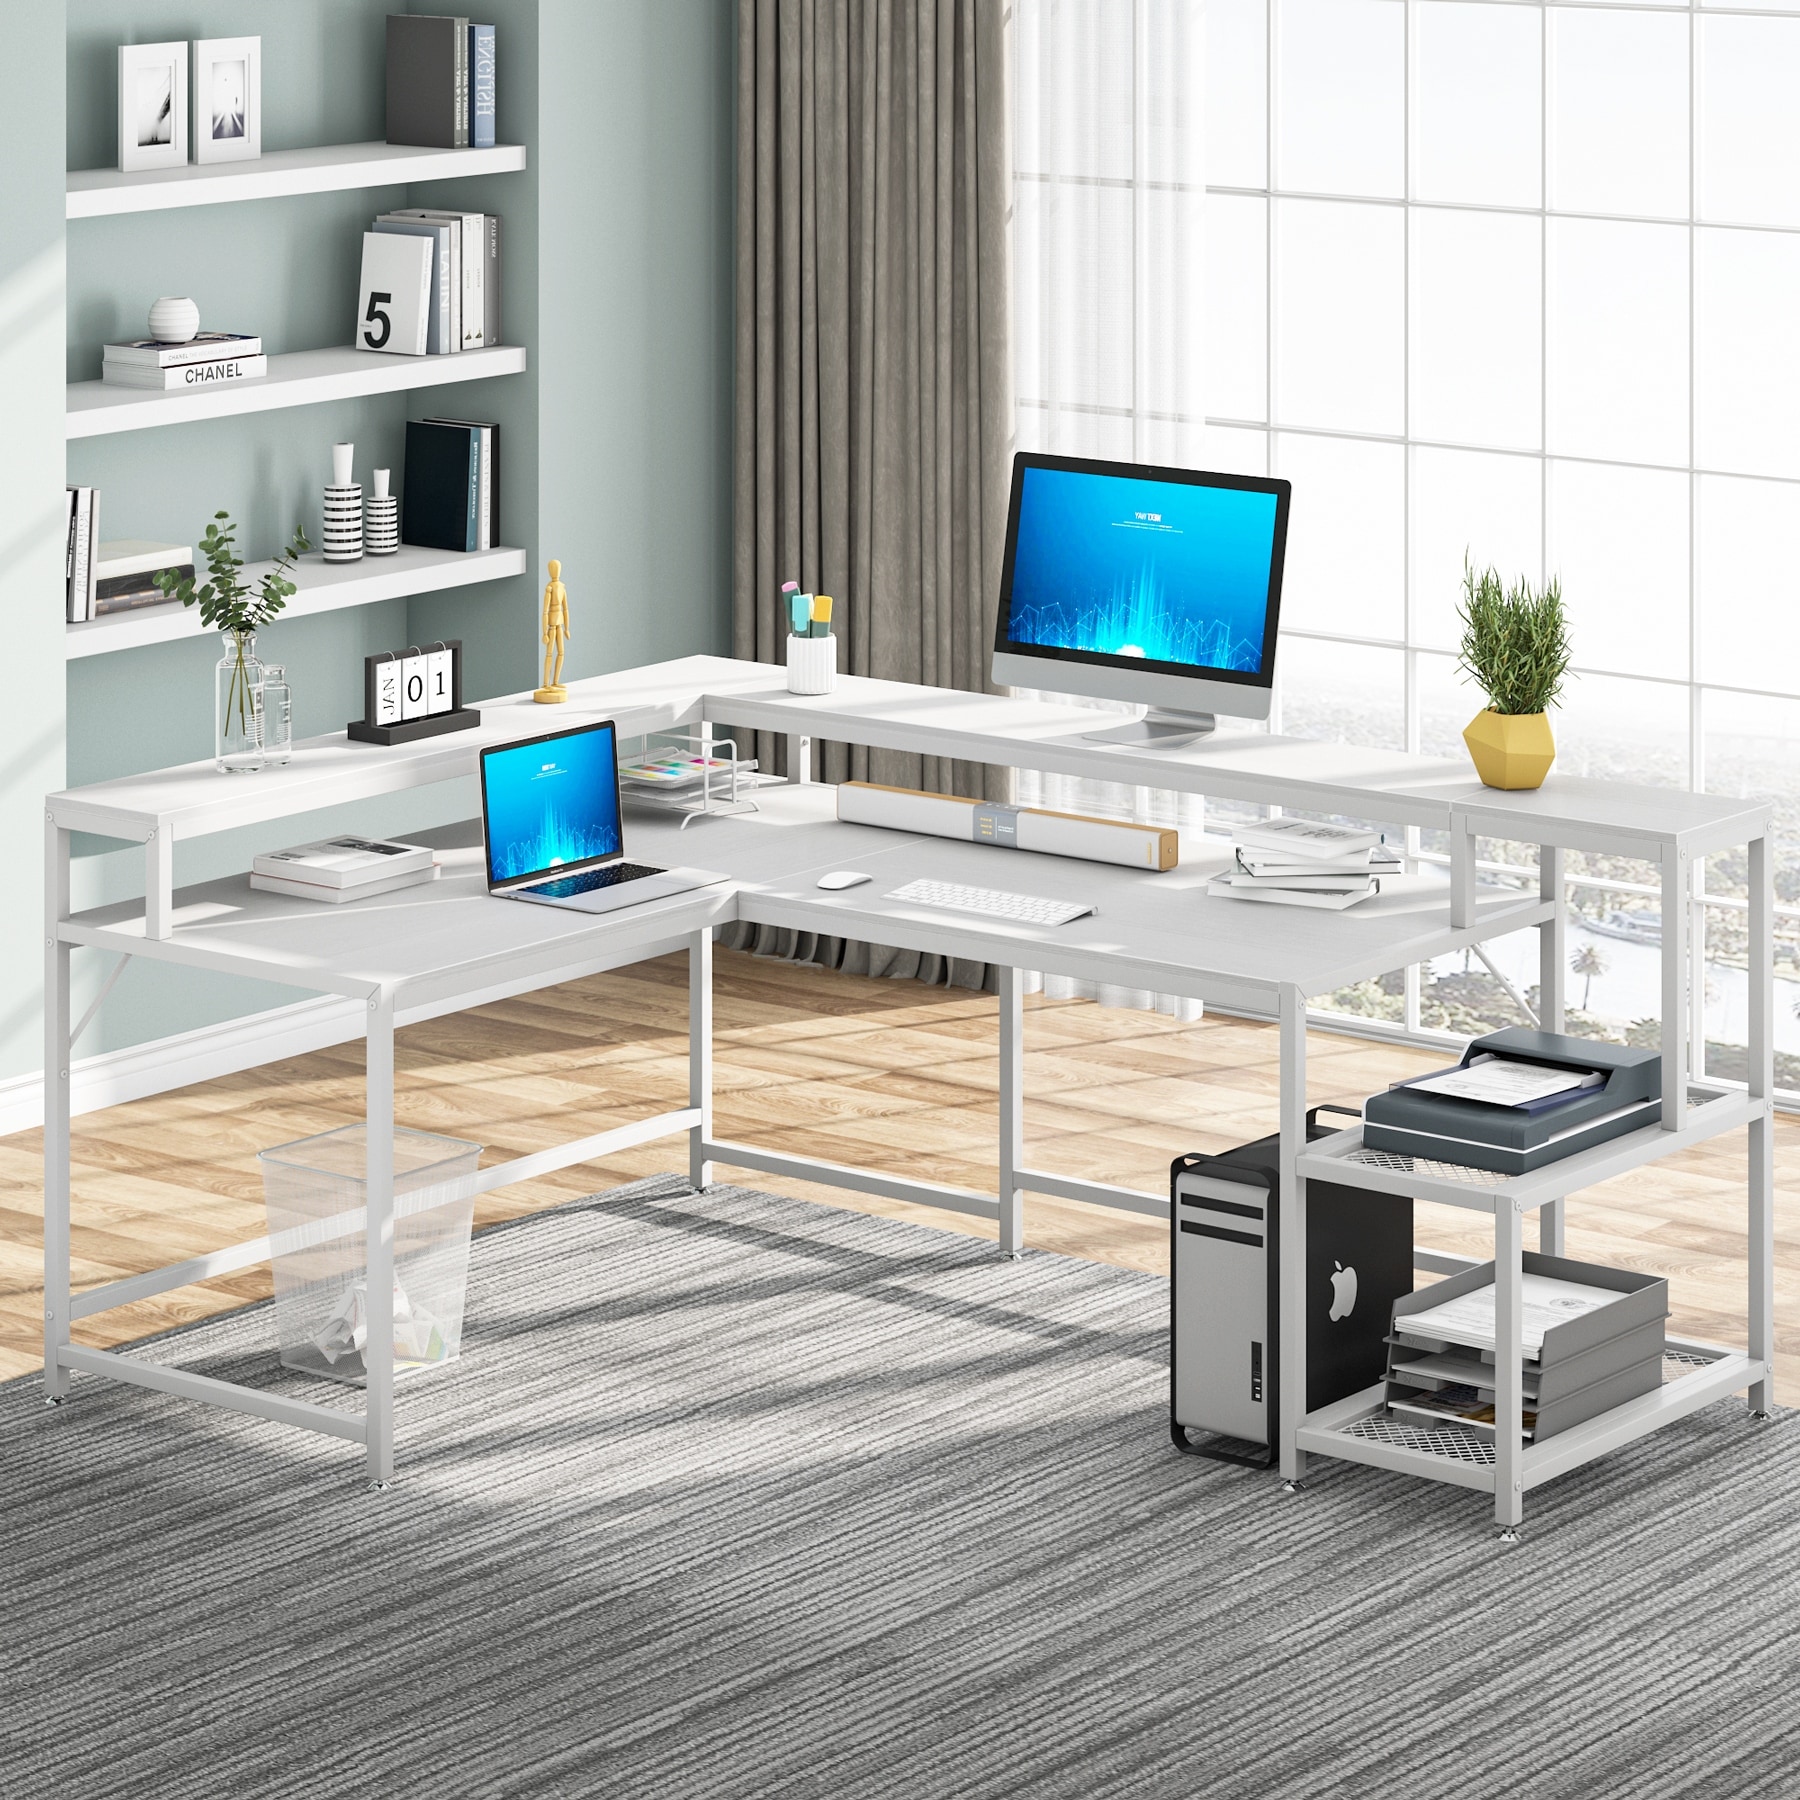 55/53 inch Reversible L Shaped Desk with Storage Shelf and Monitor  Stand,Corner Desk - On Sale - Bed Bath & Beyond - 34471867